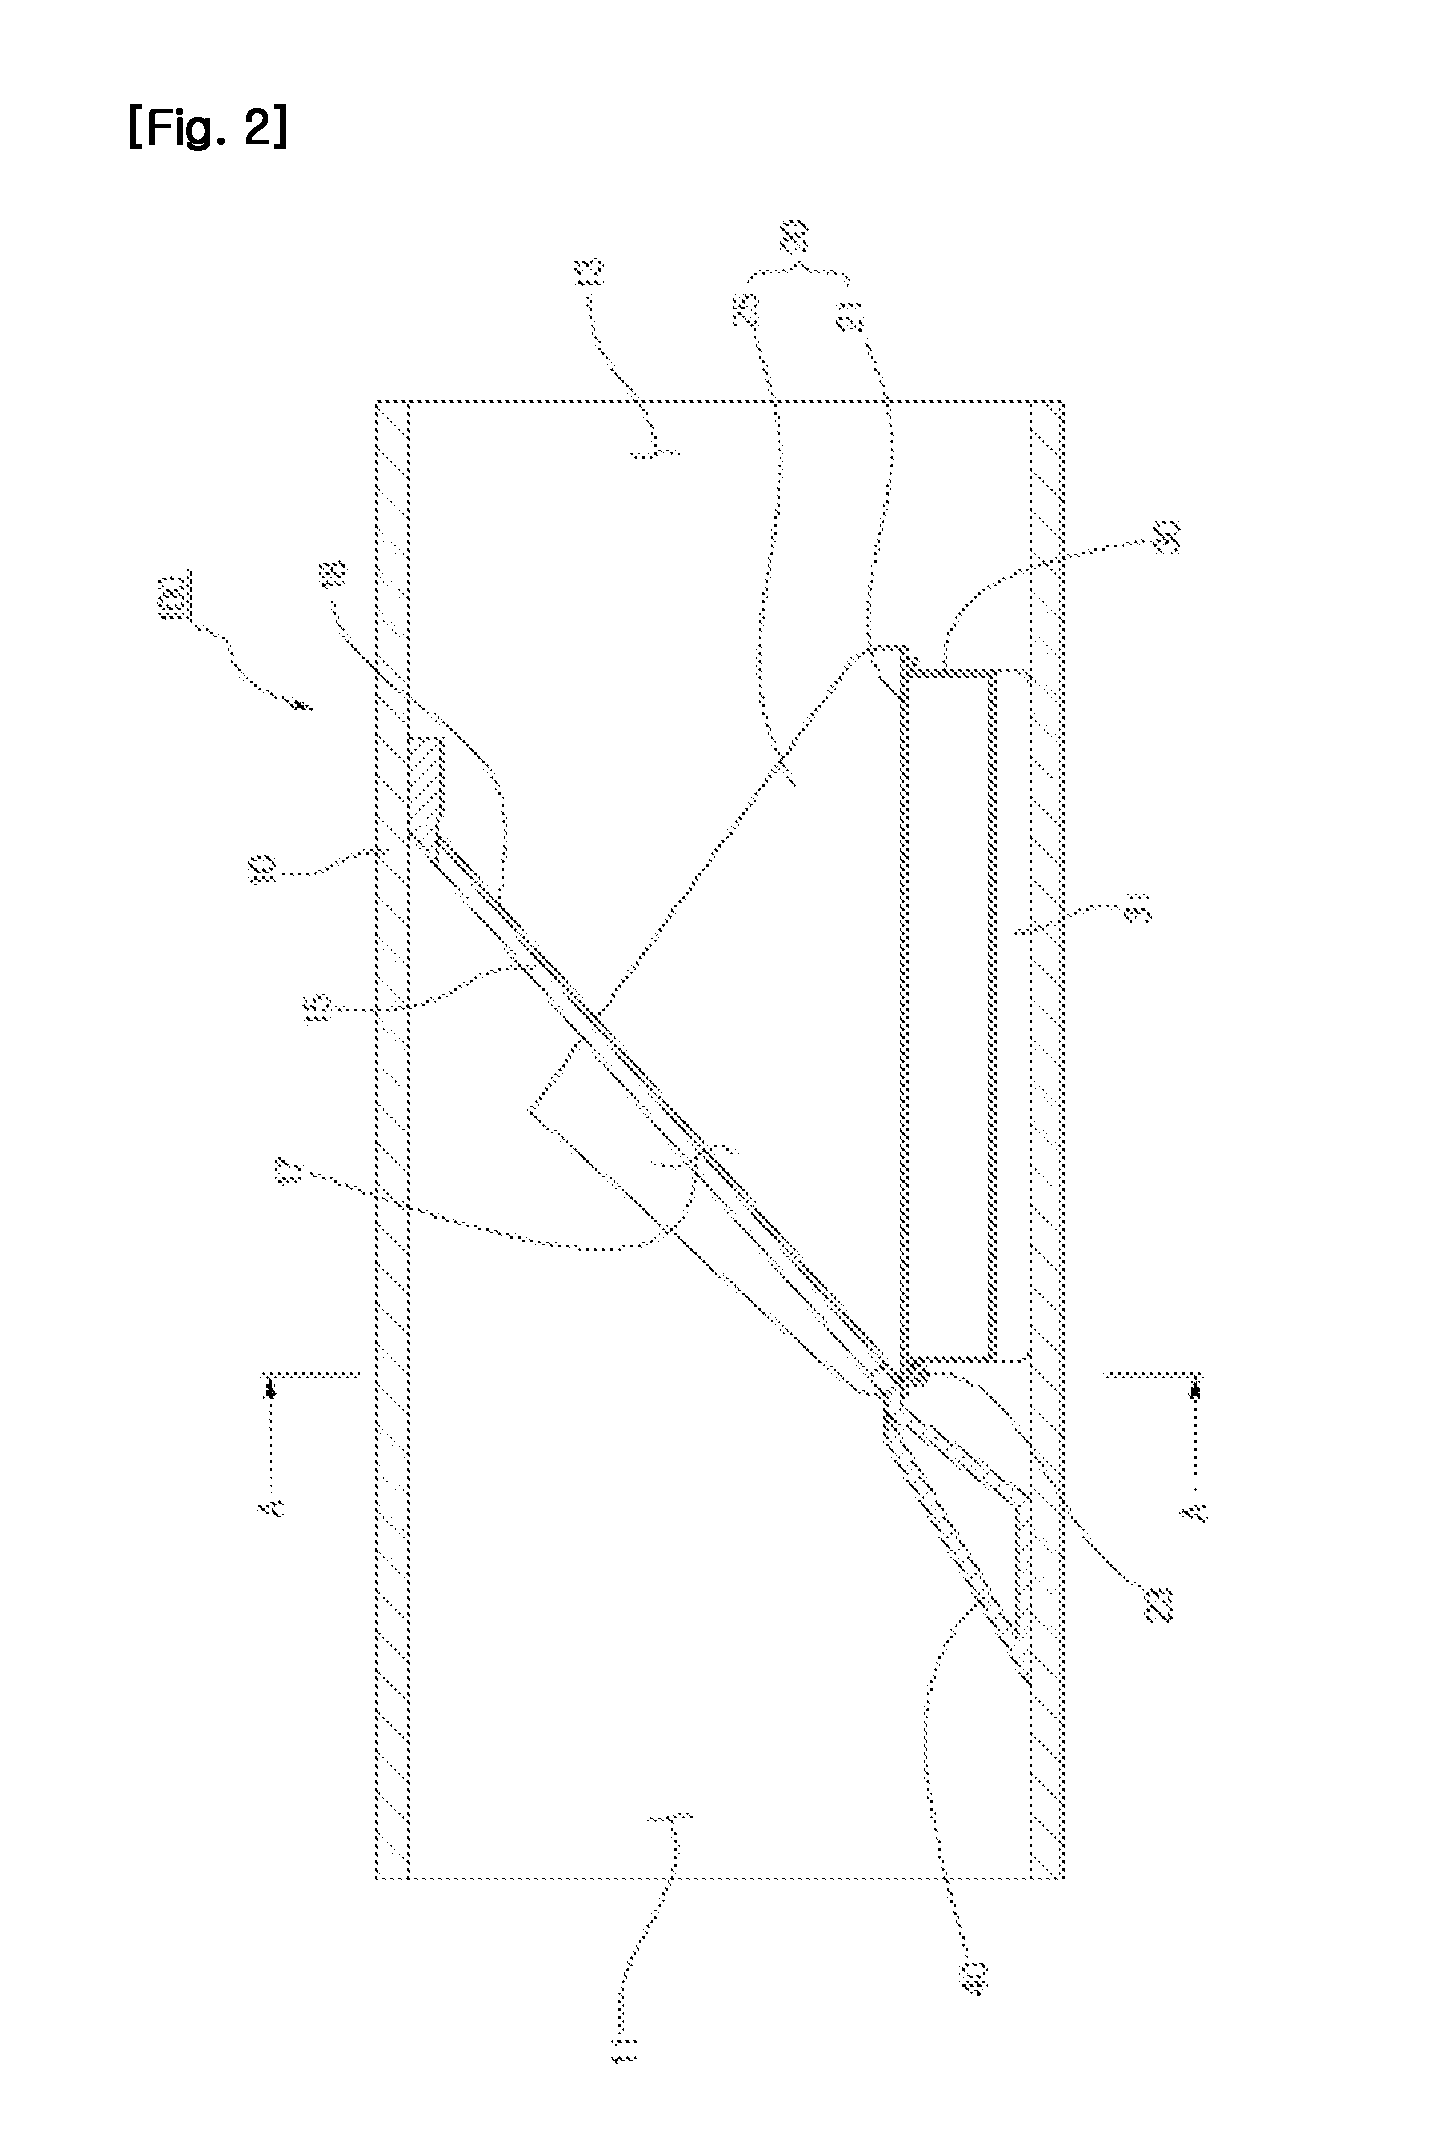 Unpowered apparatus for preventing backflow